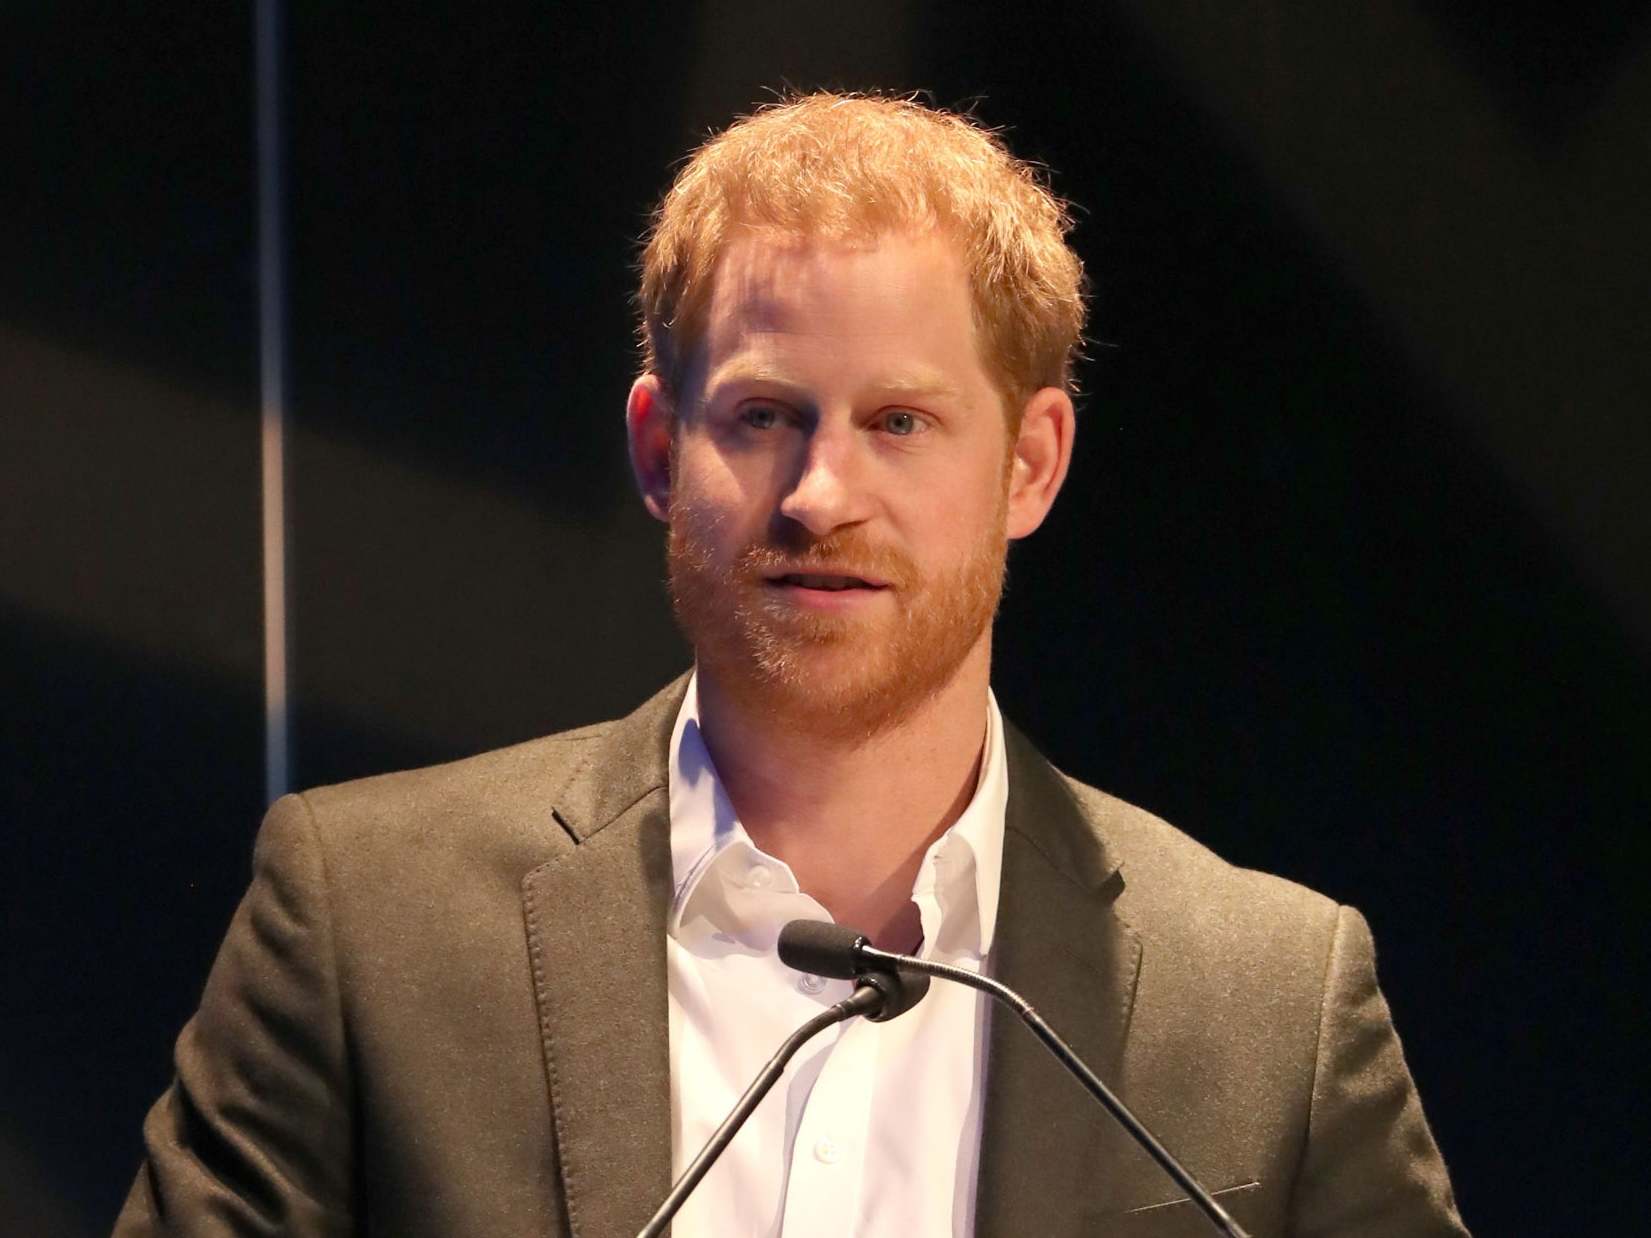 Prince Harry is alleged to have fallen for the hoax calls